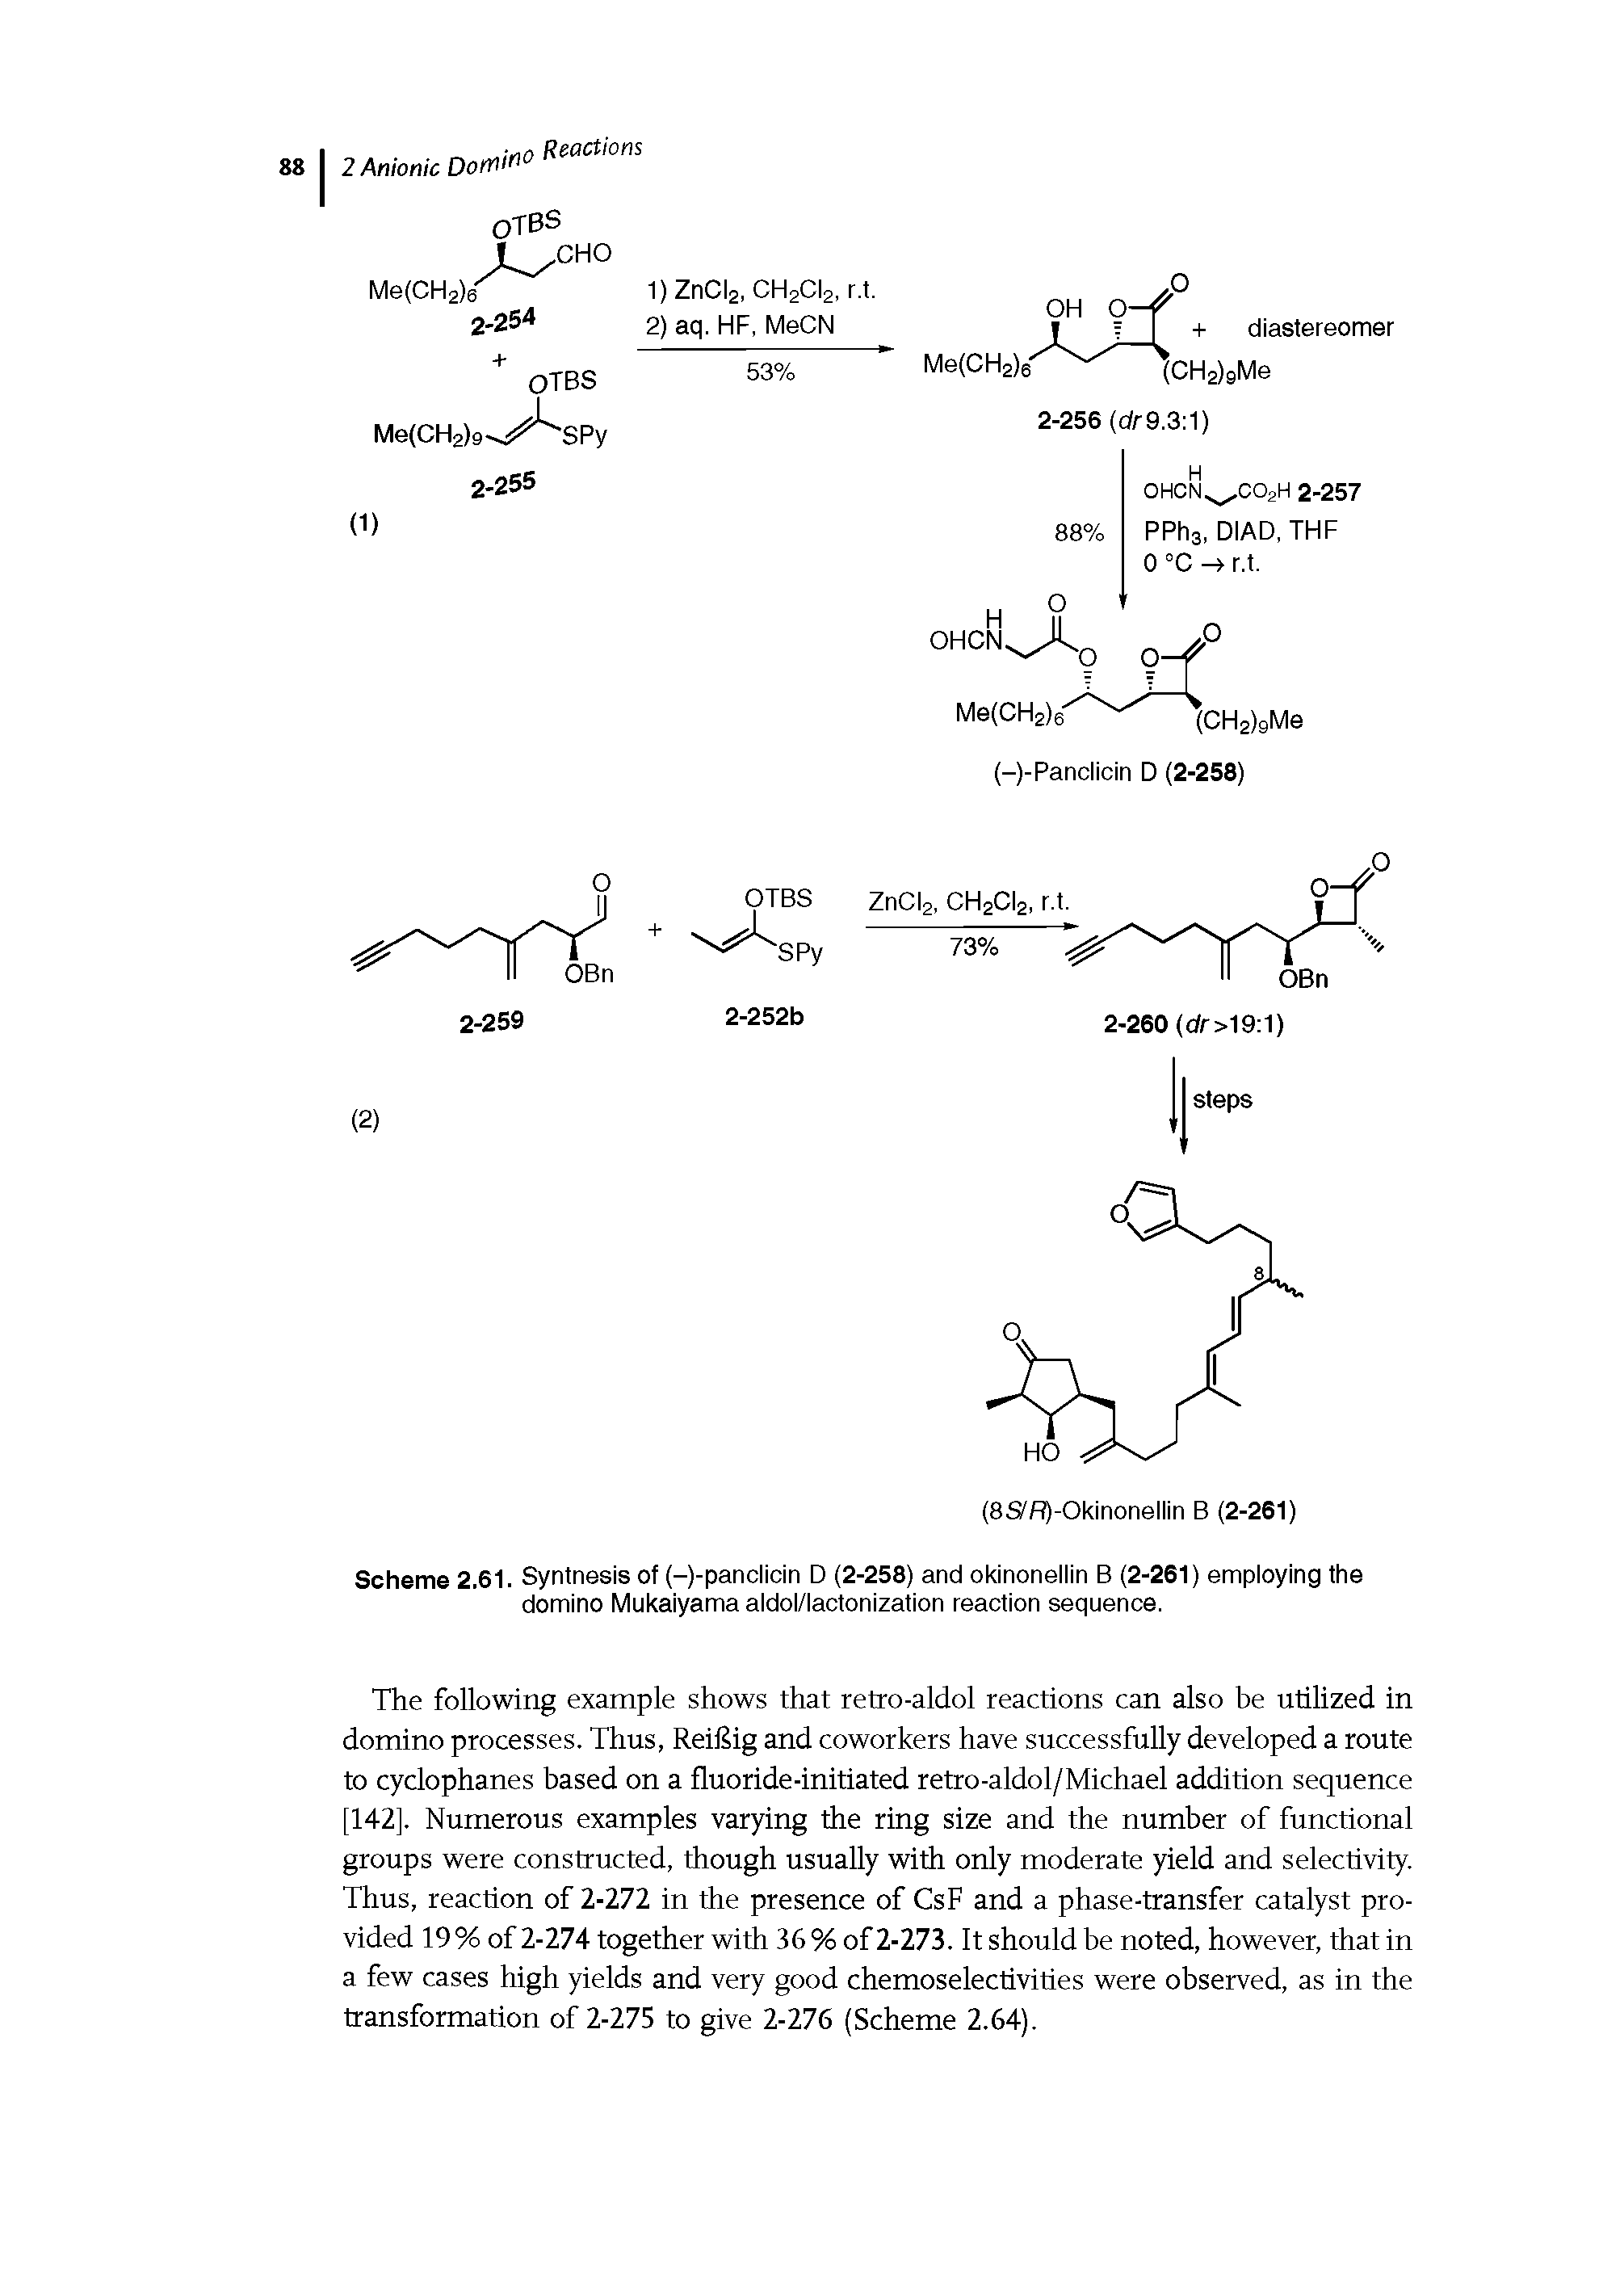 Scheme 2.61. Syntnesis of (-)-panclicin D (2-258) and okinonellin B (2-261) employing the domino Mukaiyama aldol/lactonization reaction sequence.